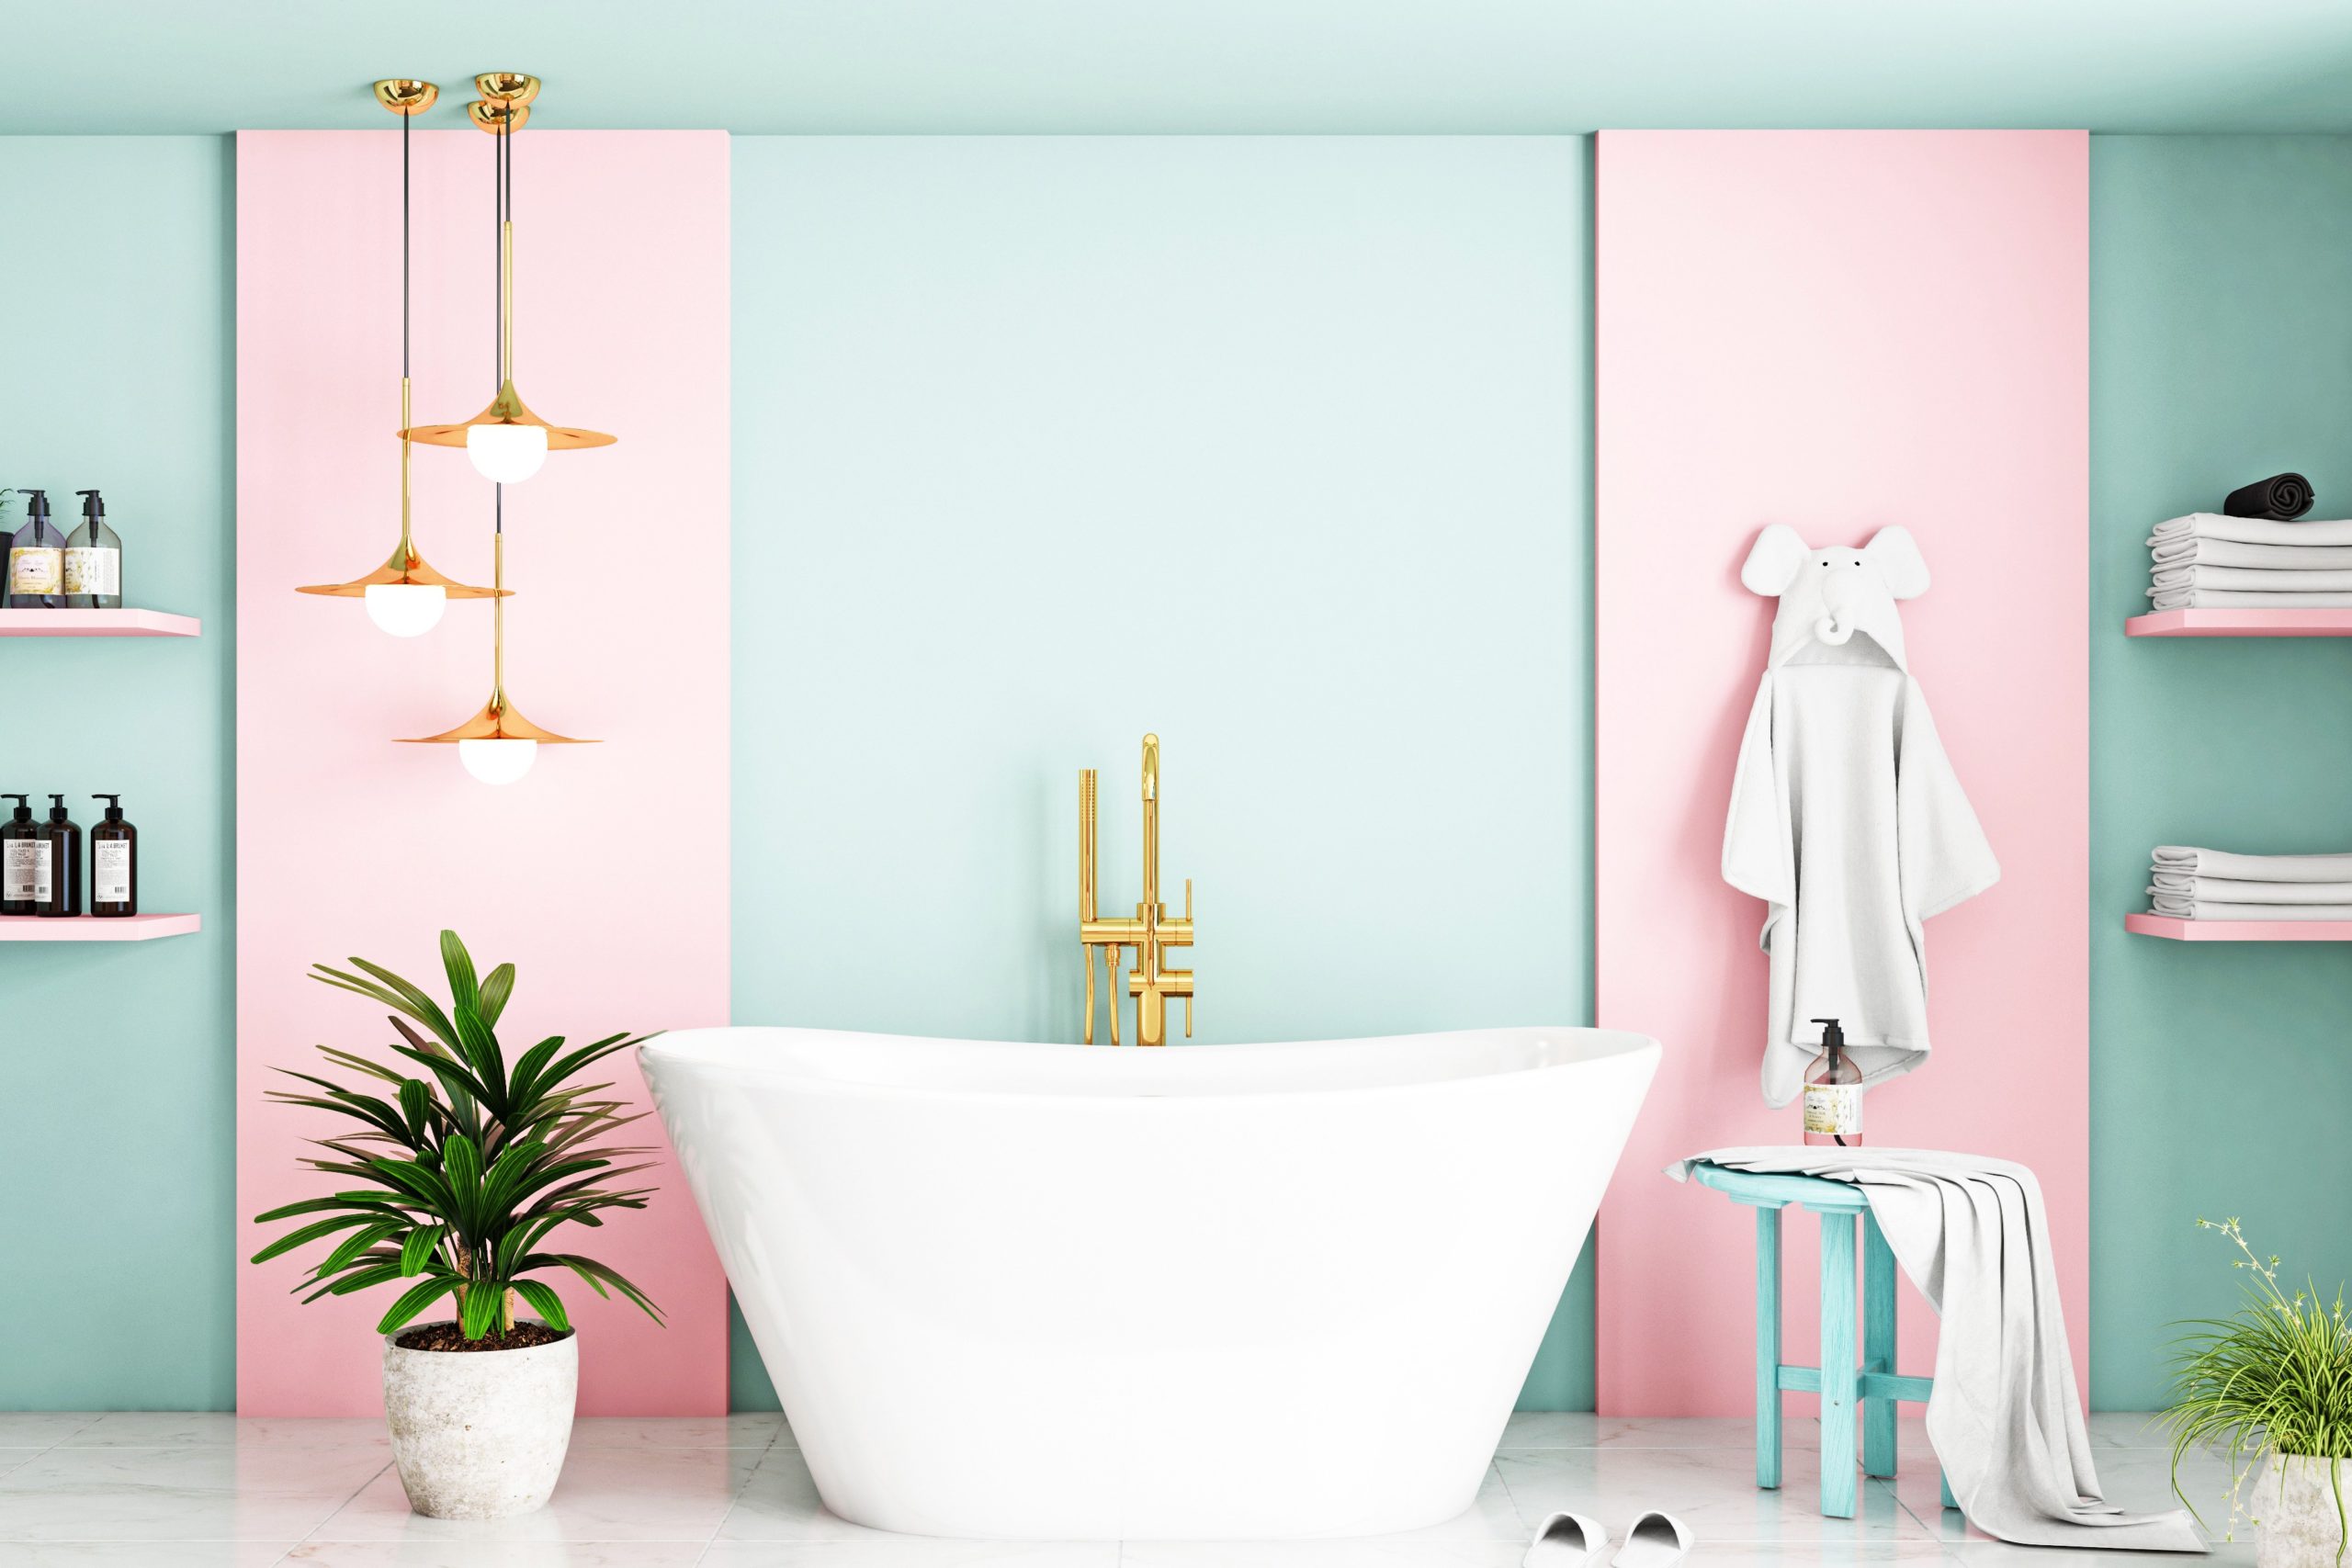 <img src="baby.jpg" alt="baby blue and pink bathroom with accent wall"/> 